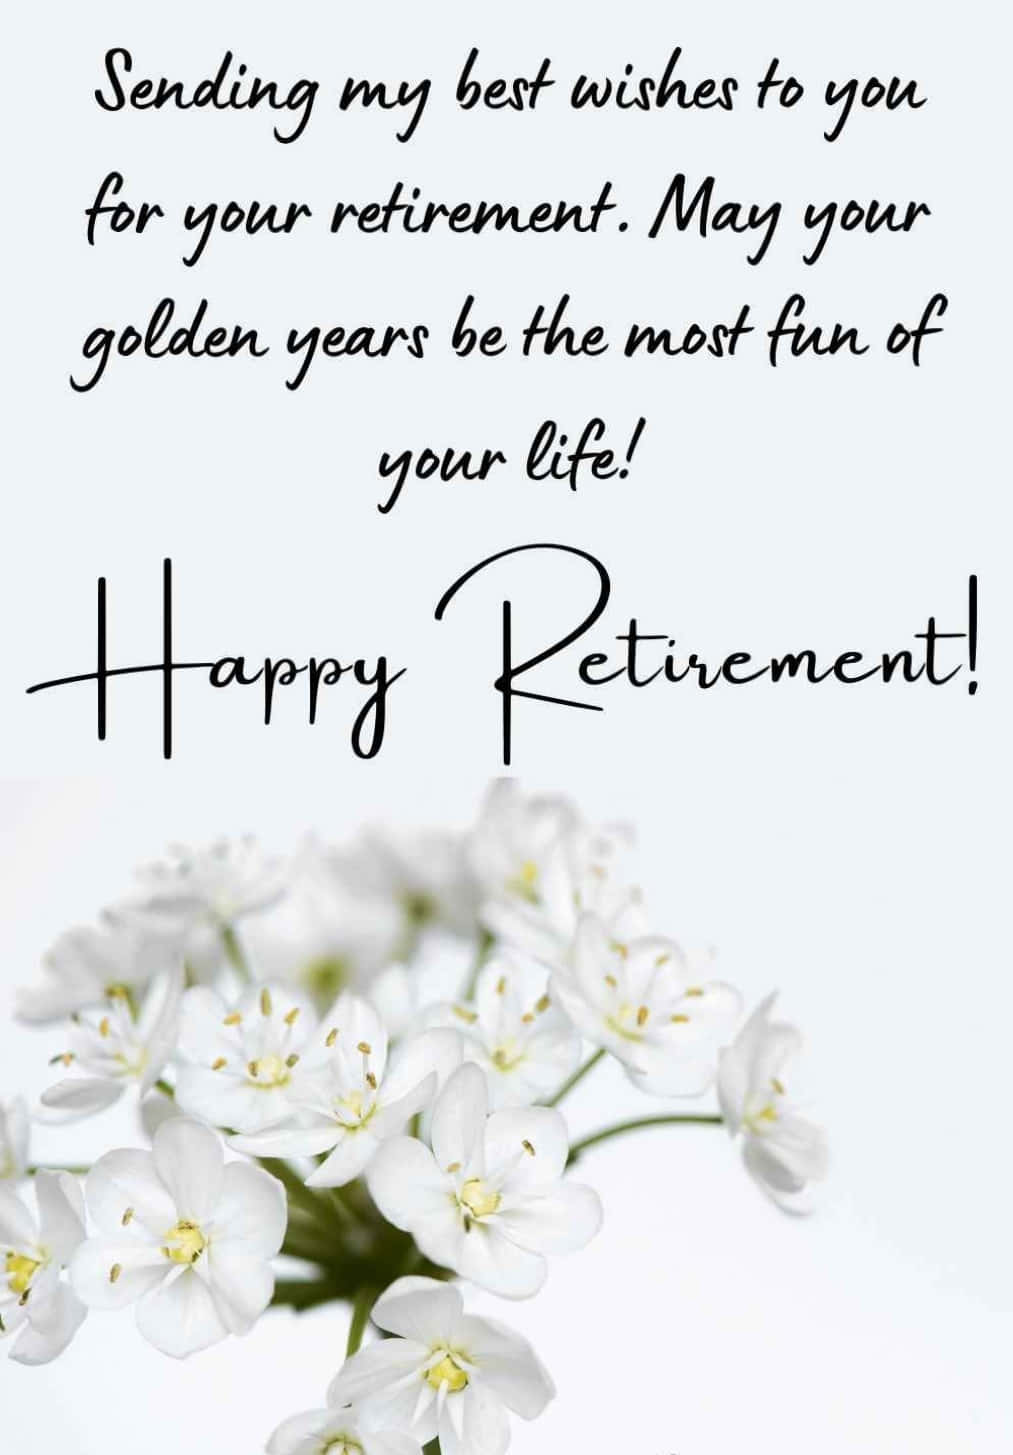 happy retirement wishes for your golden years